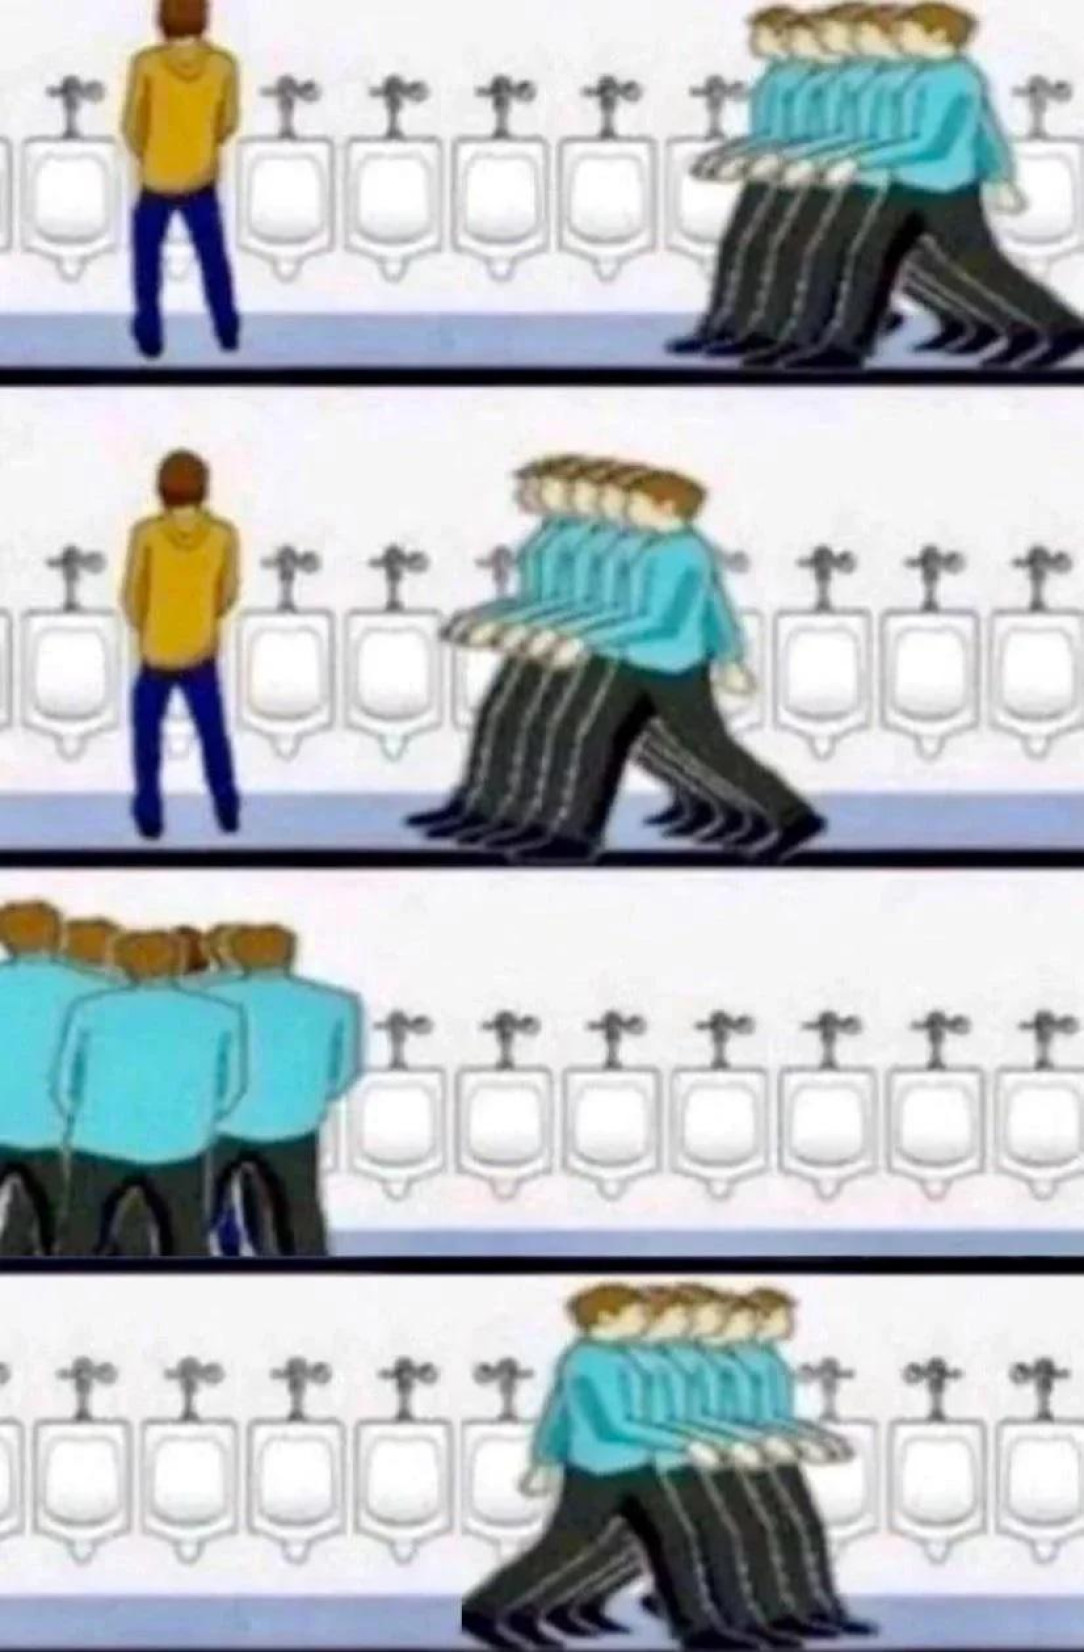 the dissolvers of the urinals: they lurk until the perfect time of striking